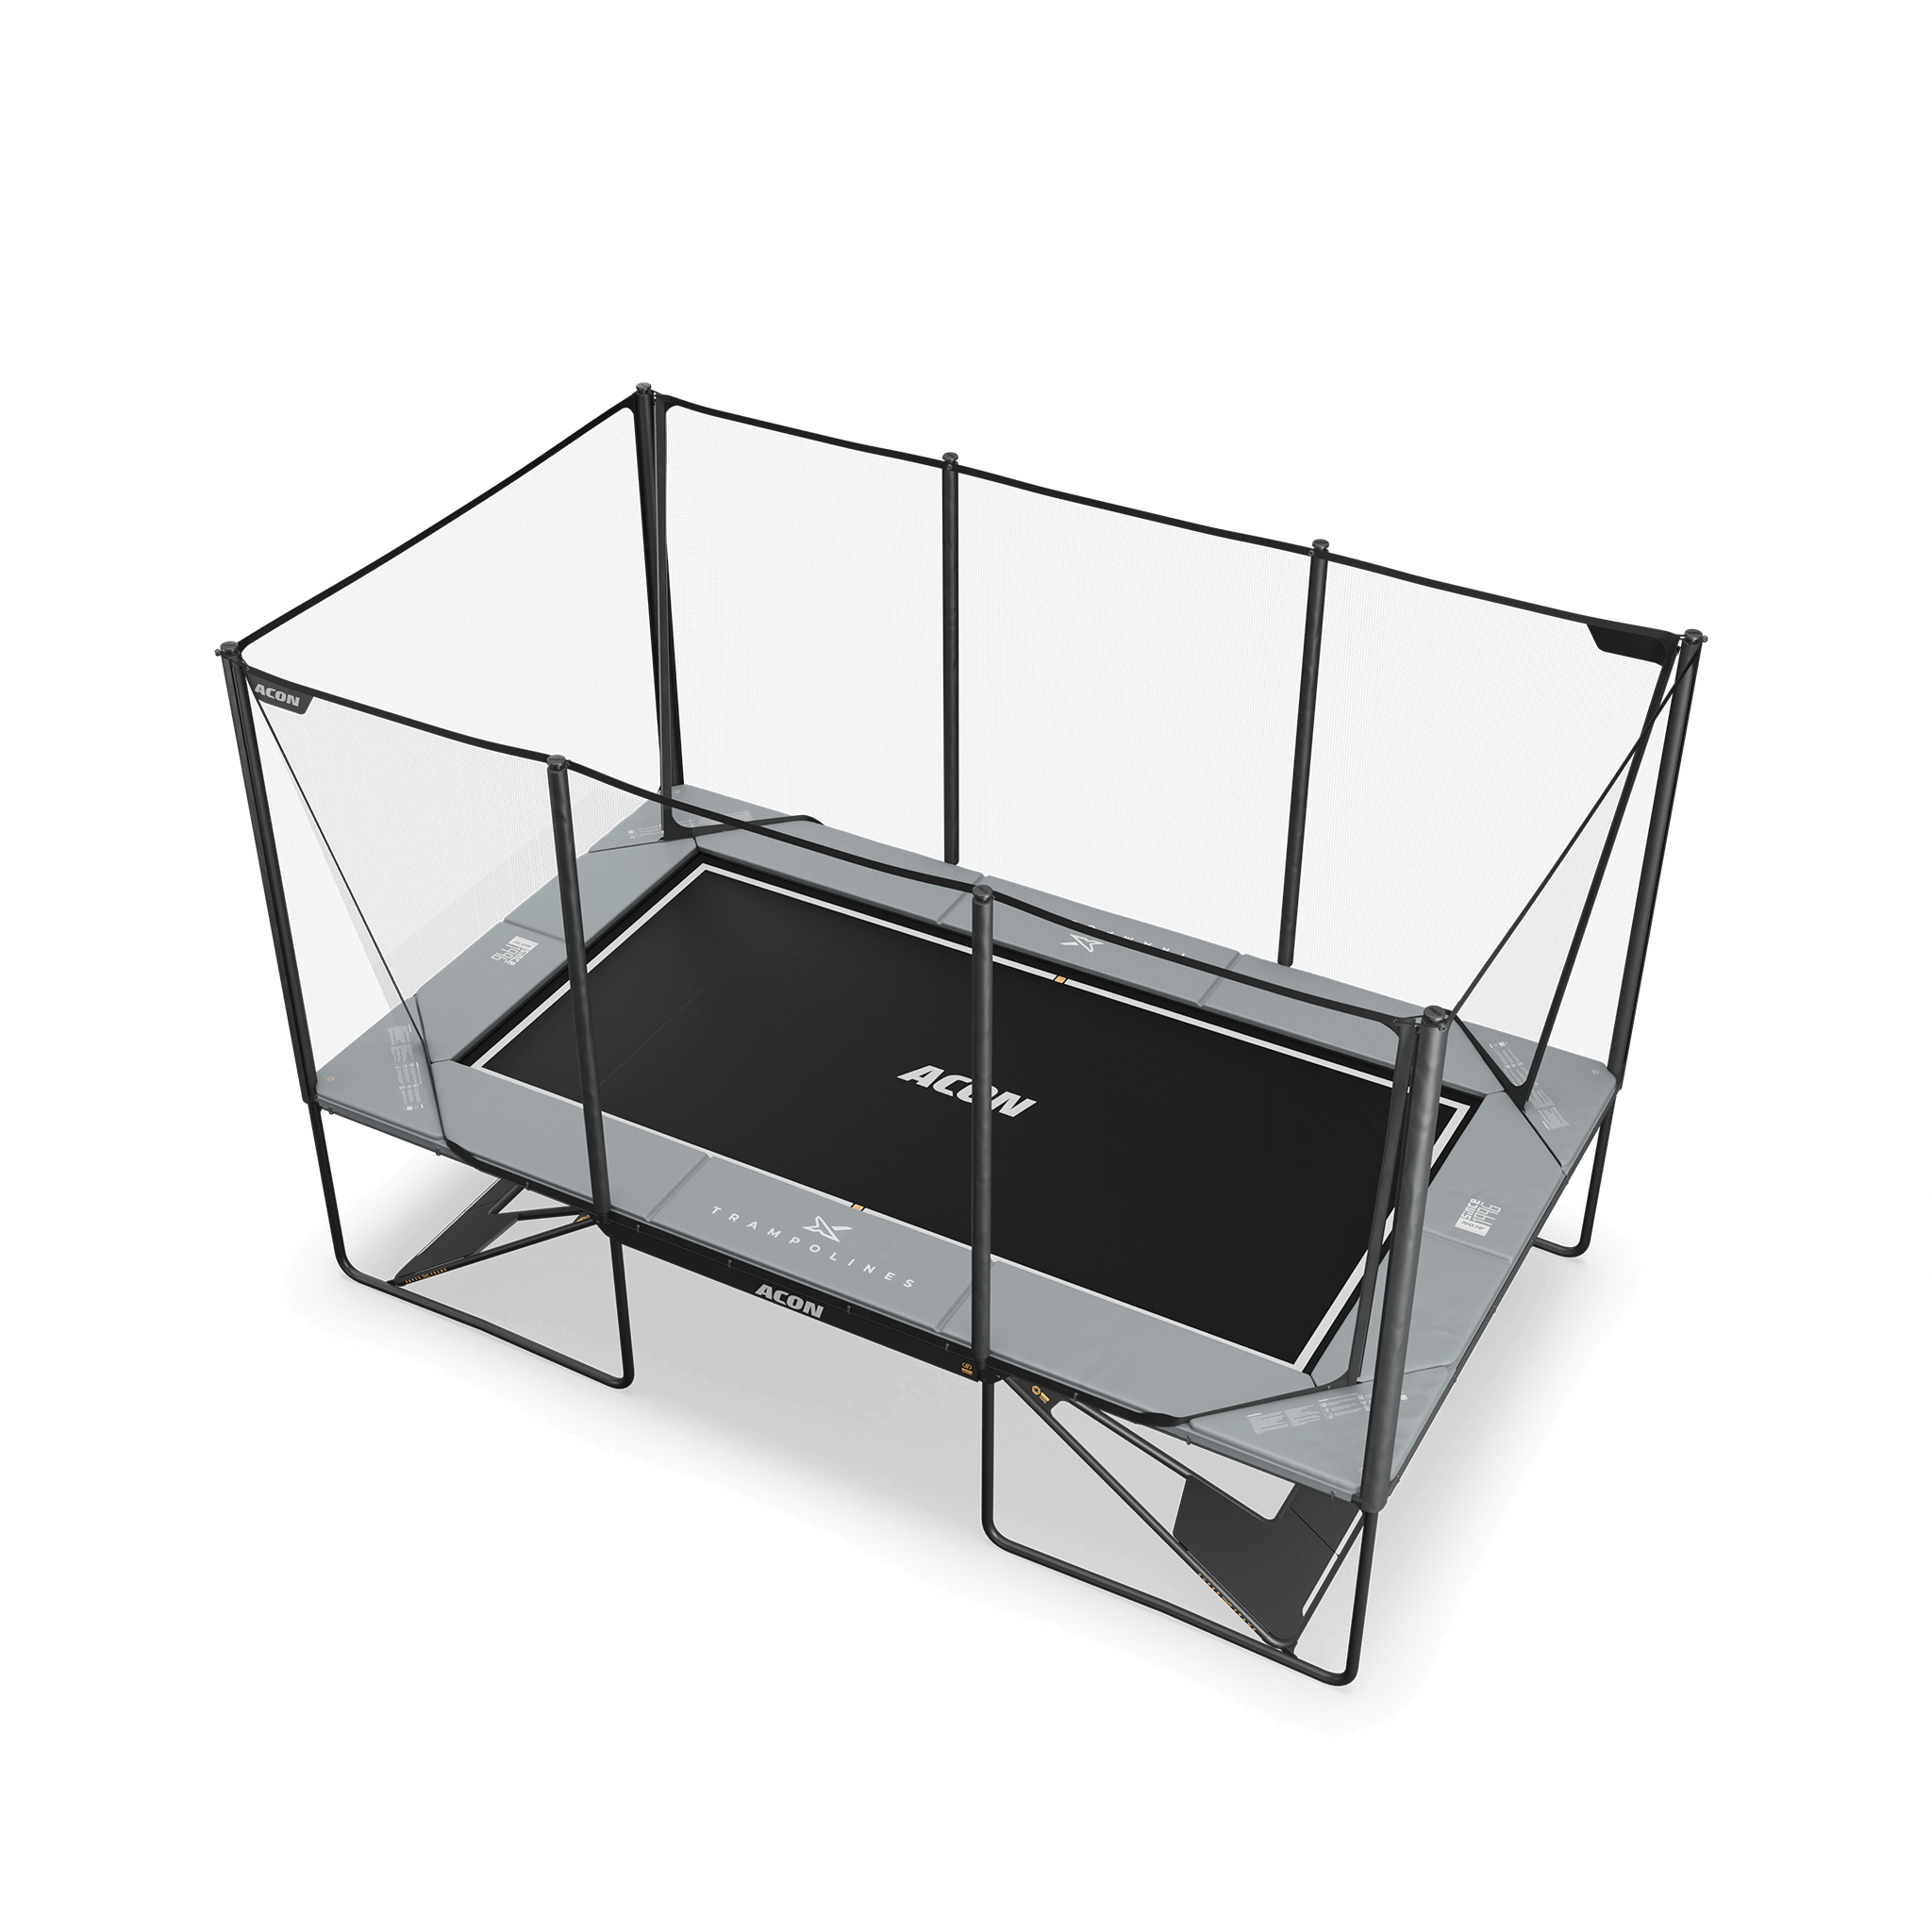 ACON X 17ft Rectangular Trampoline with Net and Ladder, Light Grey.